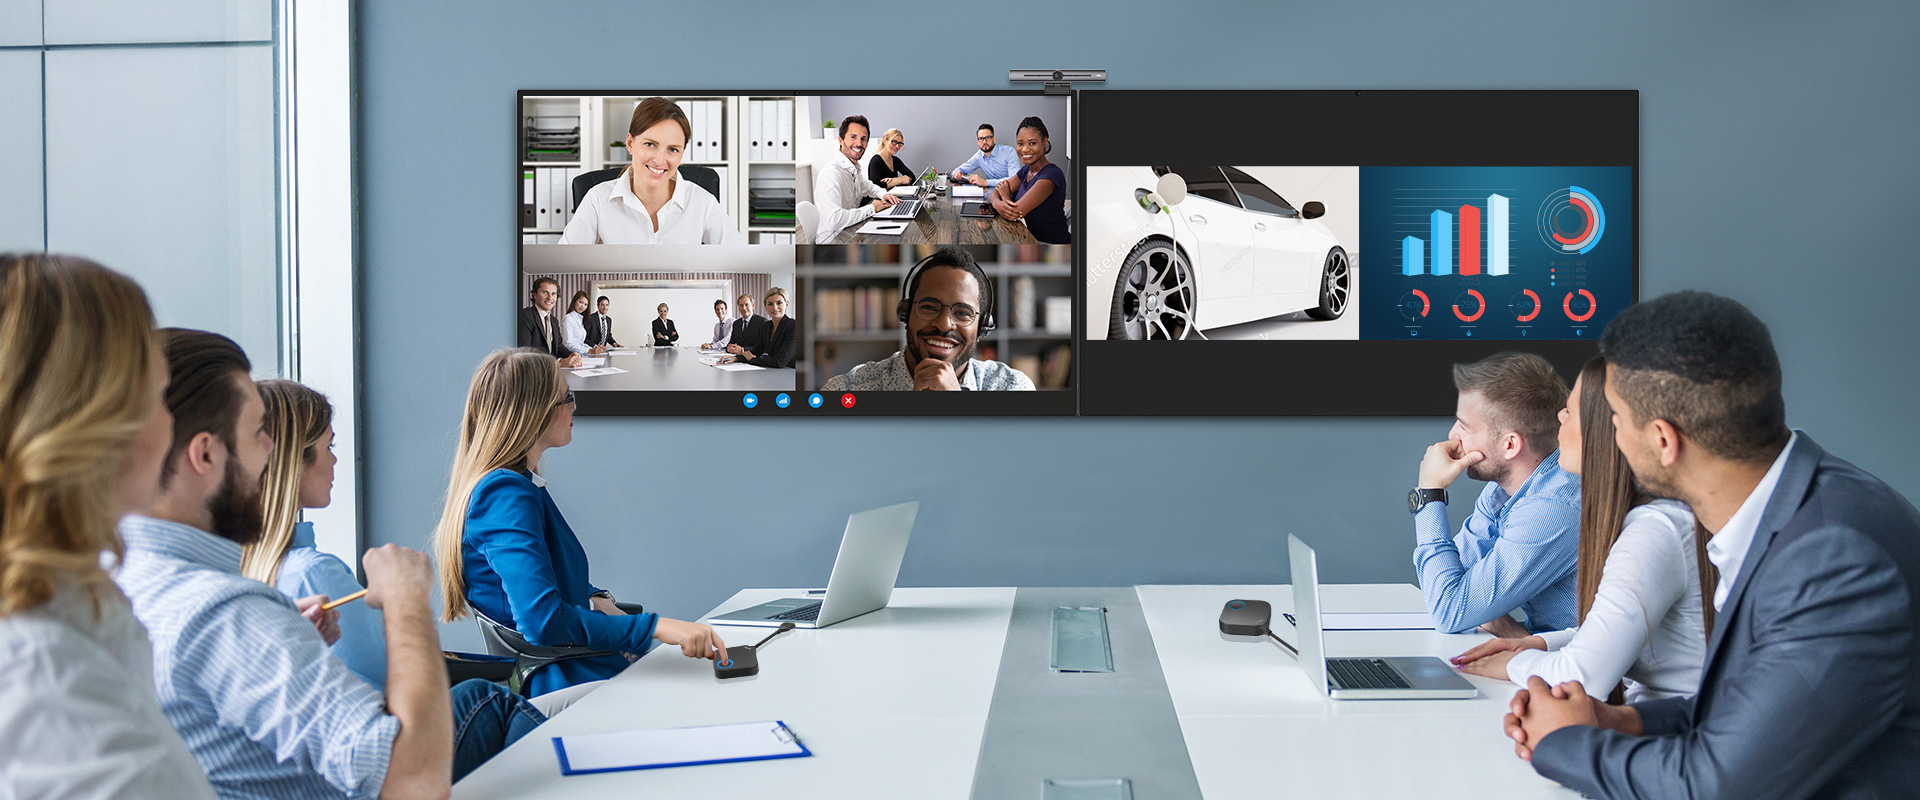 video conferencing with benq displays